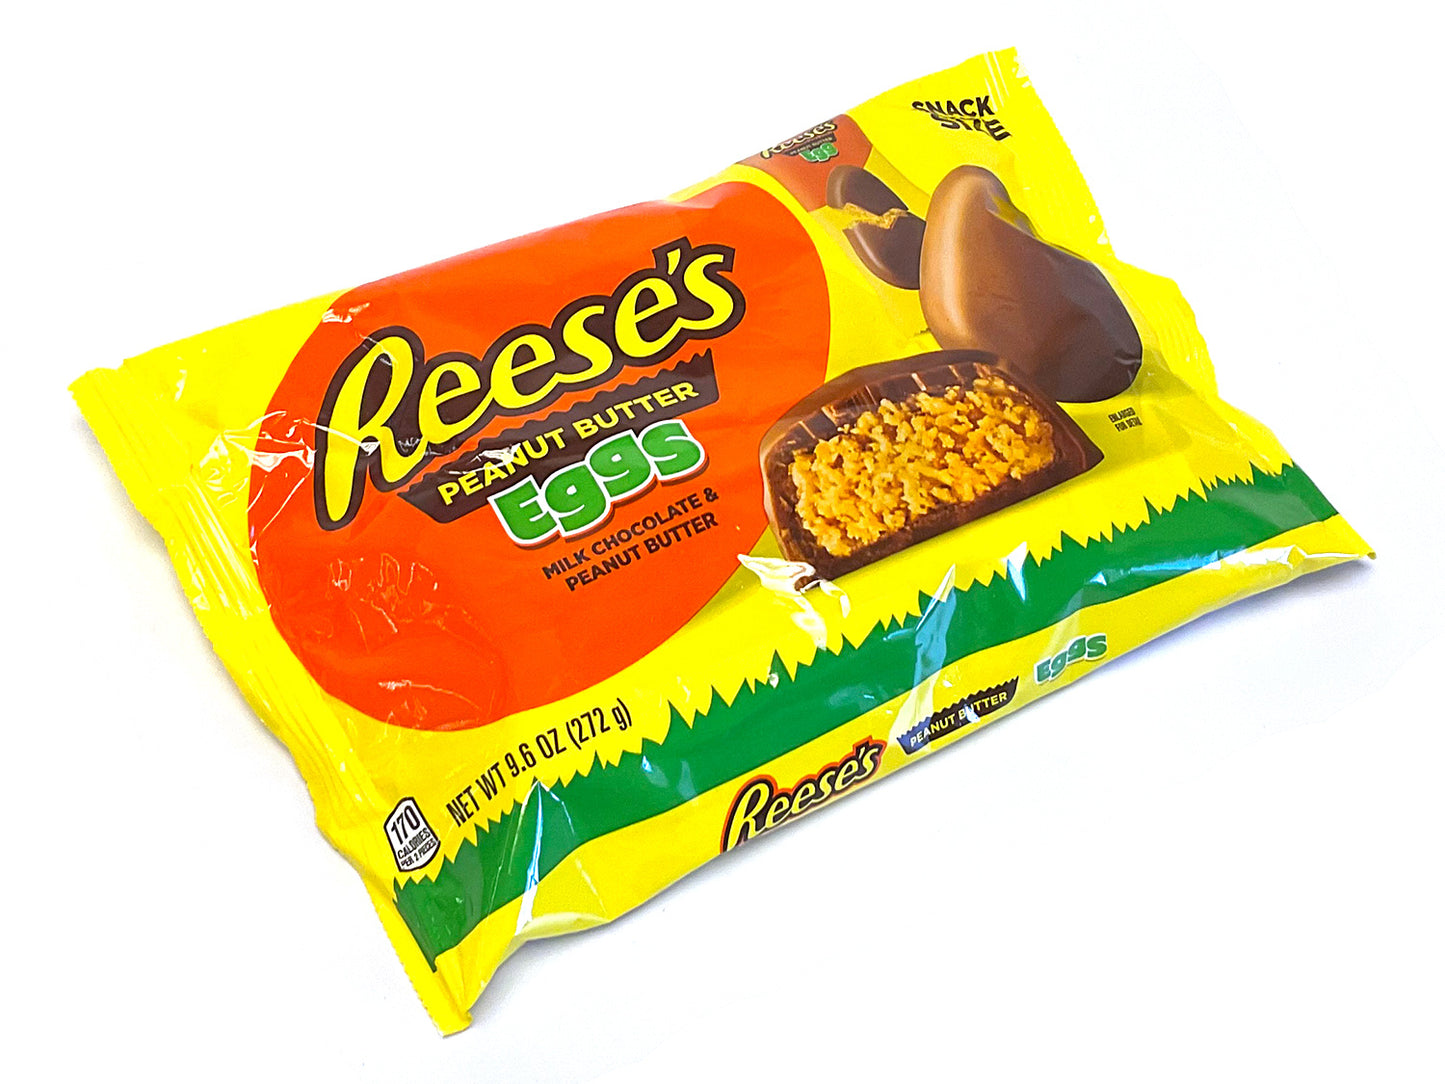 Reese's Peanut Butter Snack Size Eggs - 9.6 oz bag